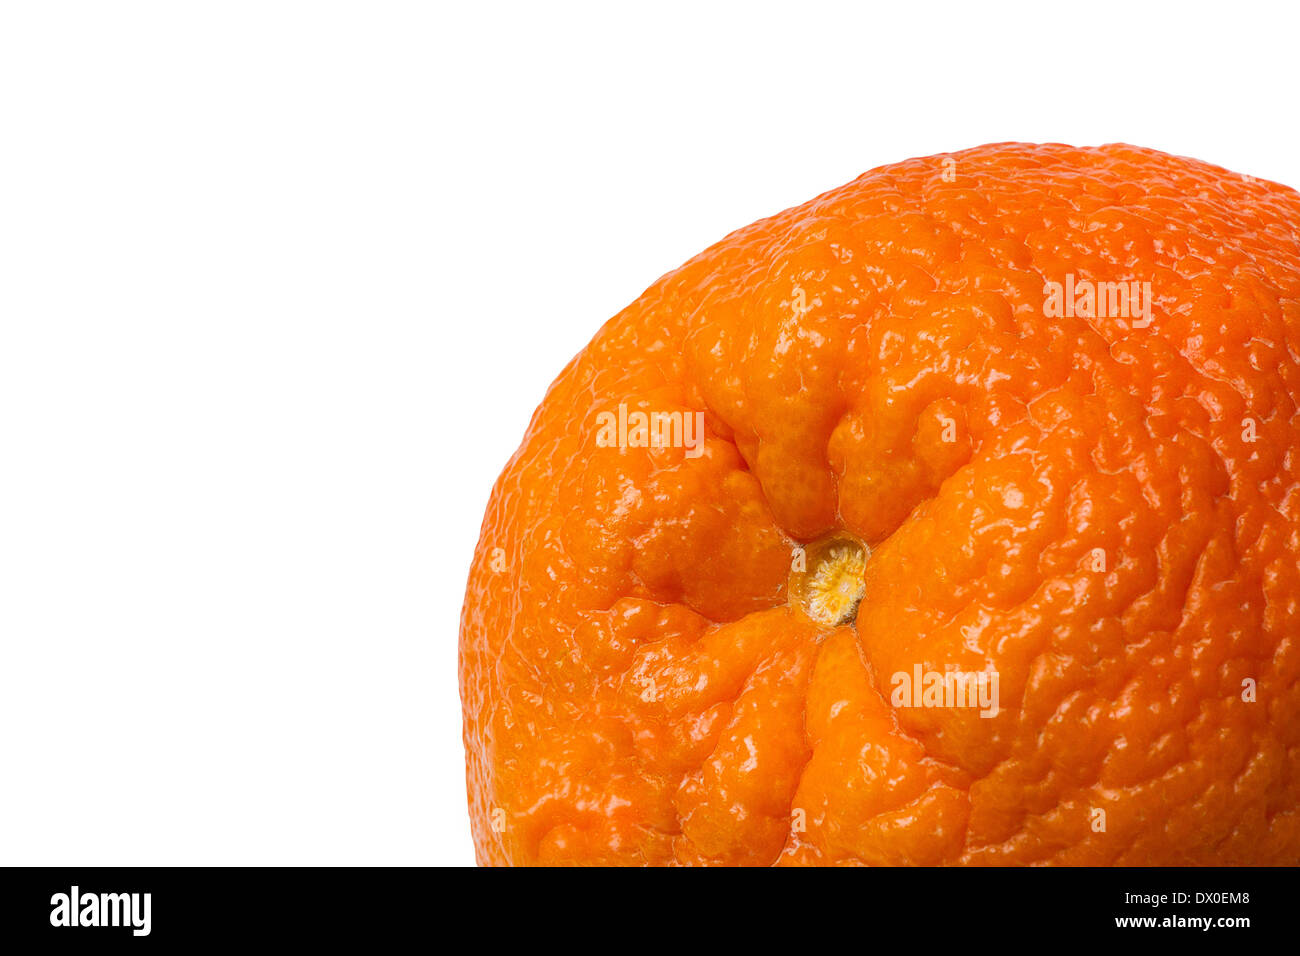 Part of the whole orange citrus fruit isolated against white background. Macro photography. Free space to enter text. Stock Photo